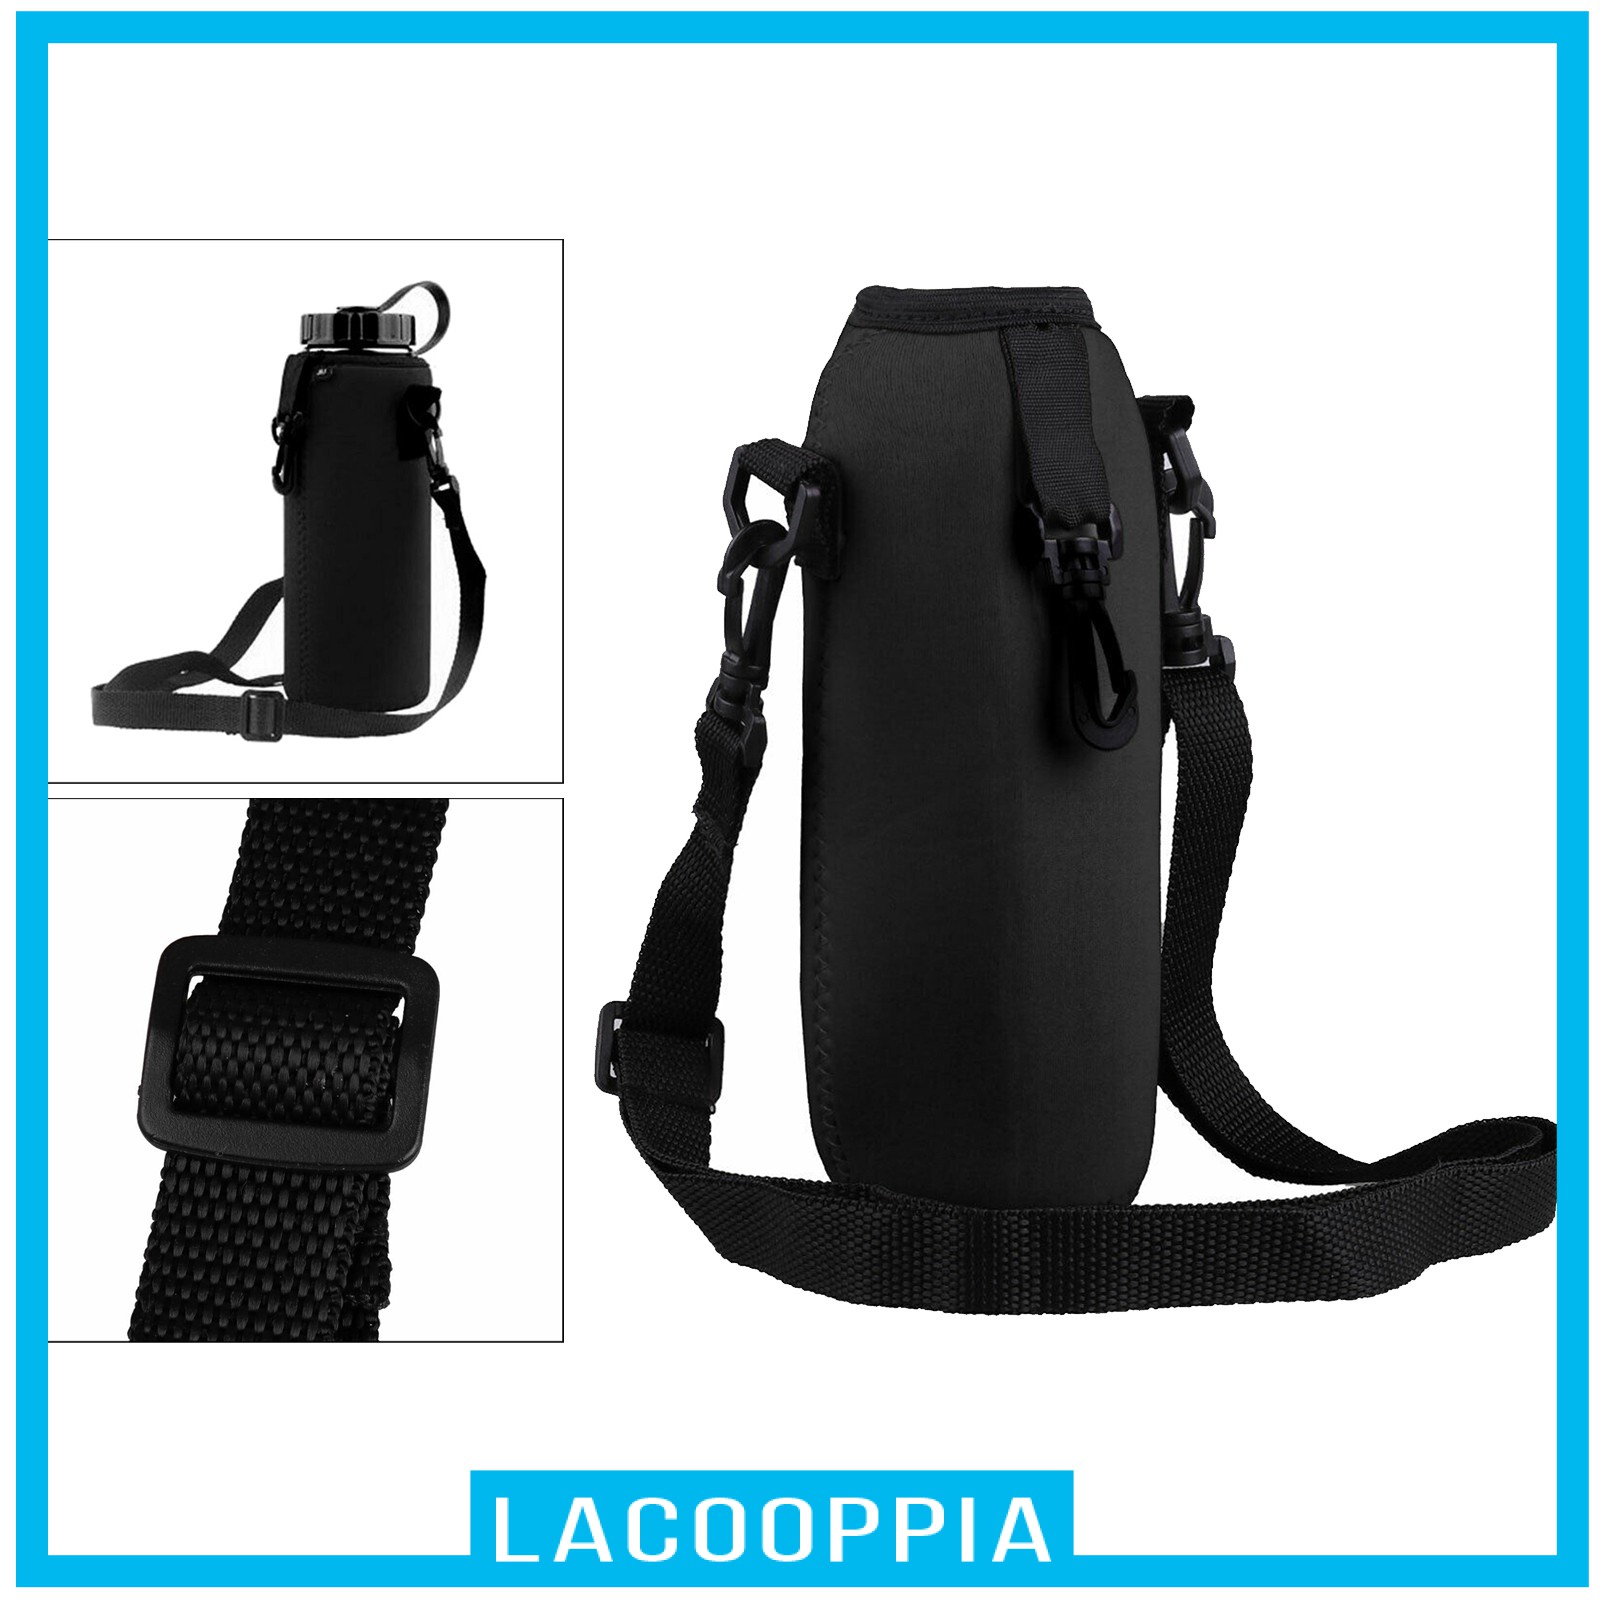 [LACOOPPIA] 750ML Neoprene Water Bottle Carrier Insulated Cover Bag Pouch with Strap & Hook